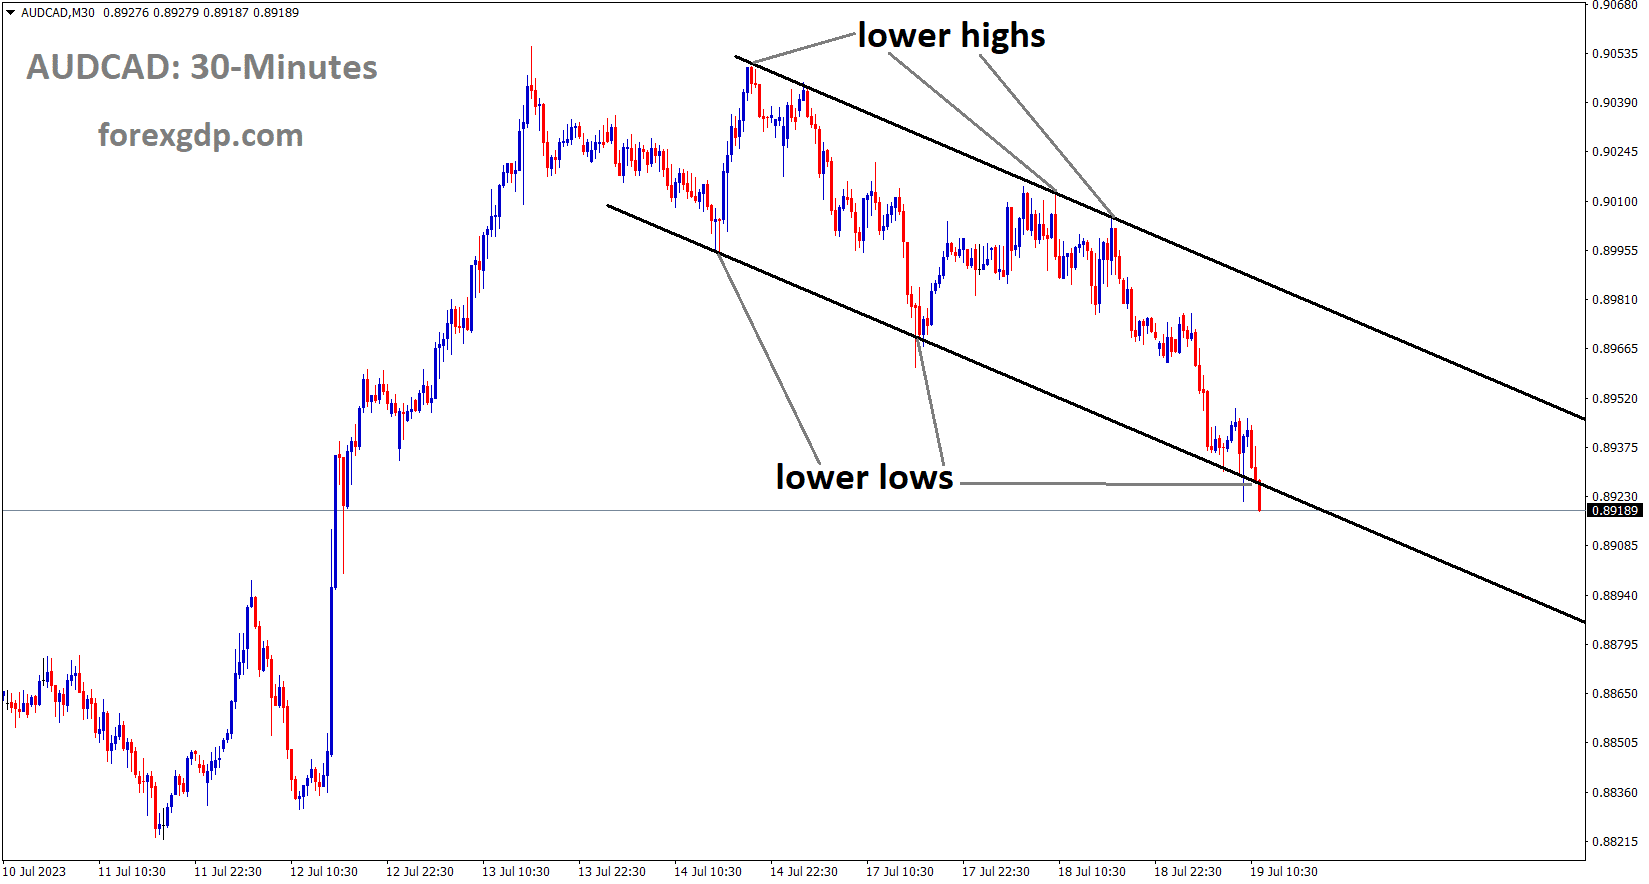 AUDCAD is moving in the Descending channel and the market has reached the lower low area of the channel